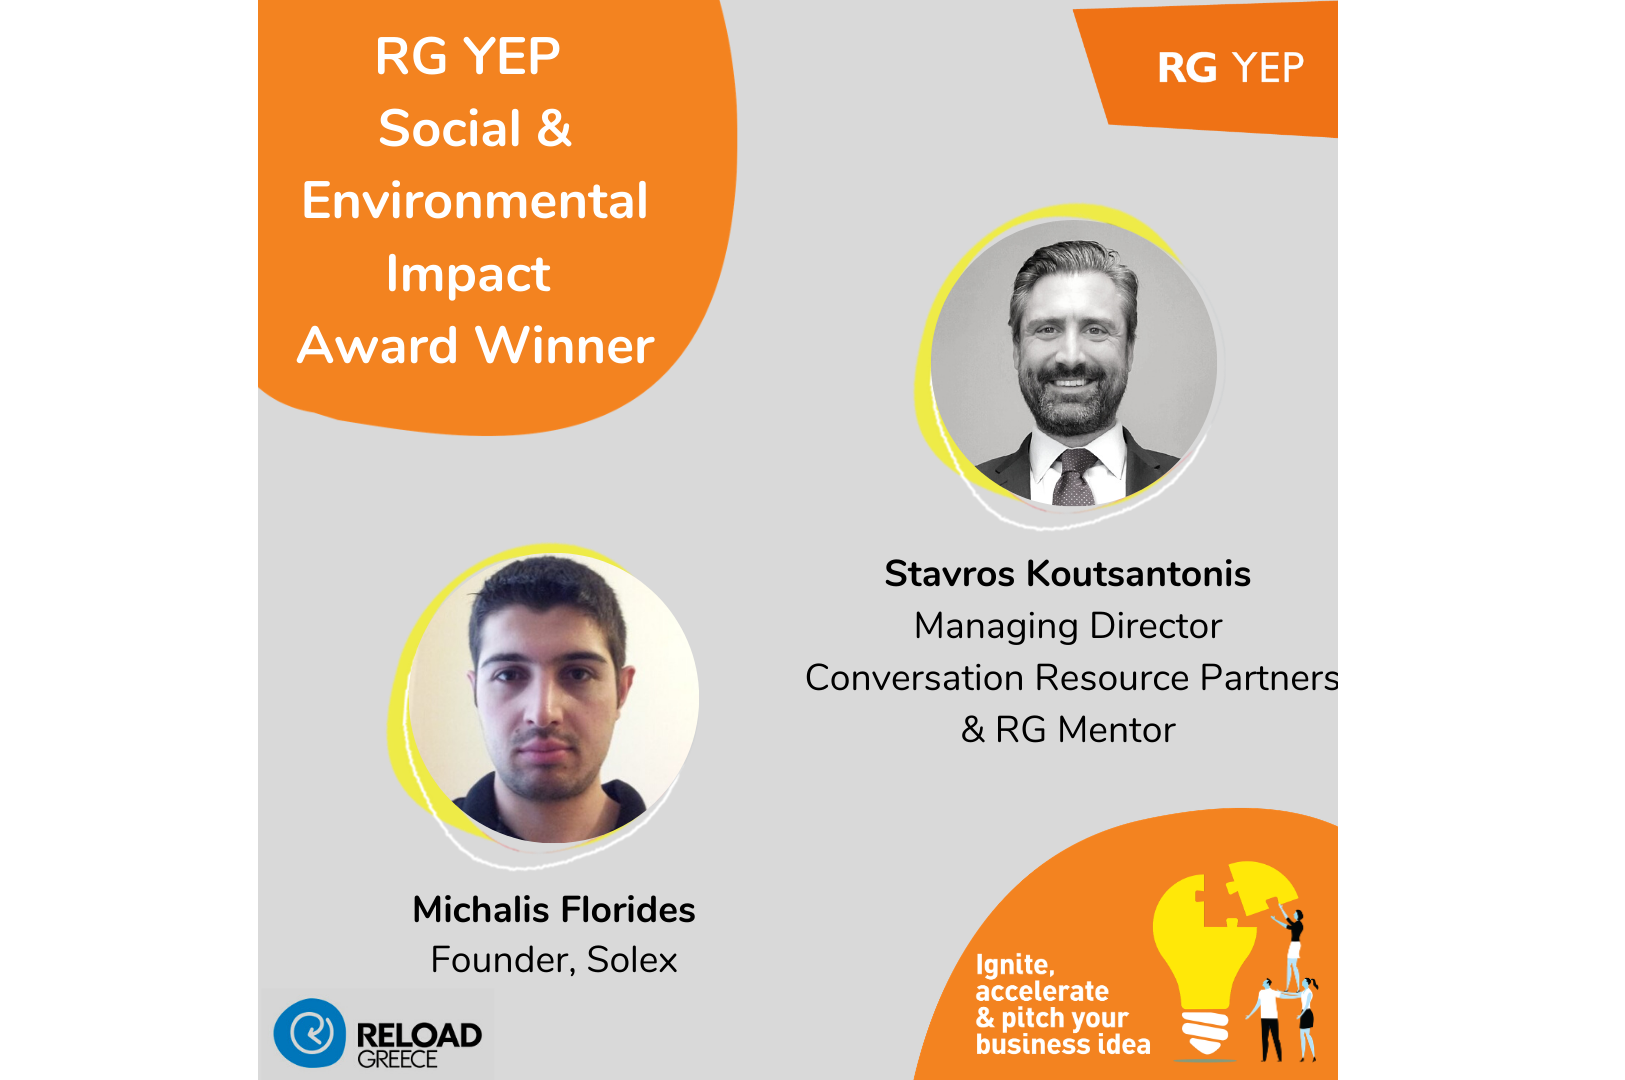 Interview with Michalis Florides, Founder of Solex - the Winner of Environmental & Social Impact Award of the RG Young entrepreneurship Program 2019!